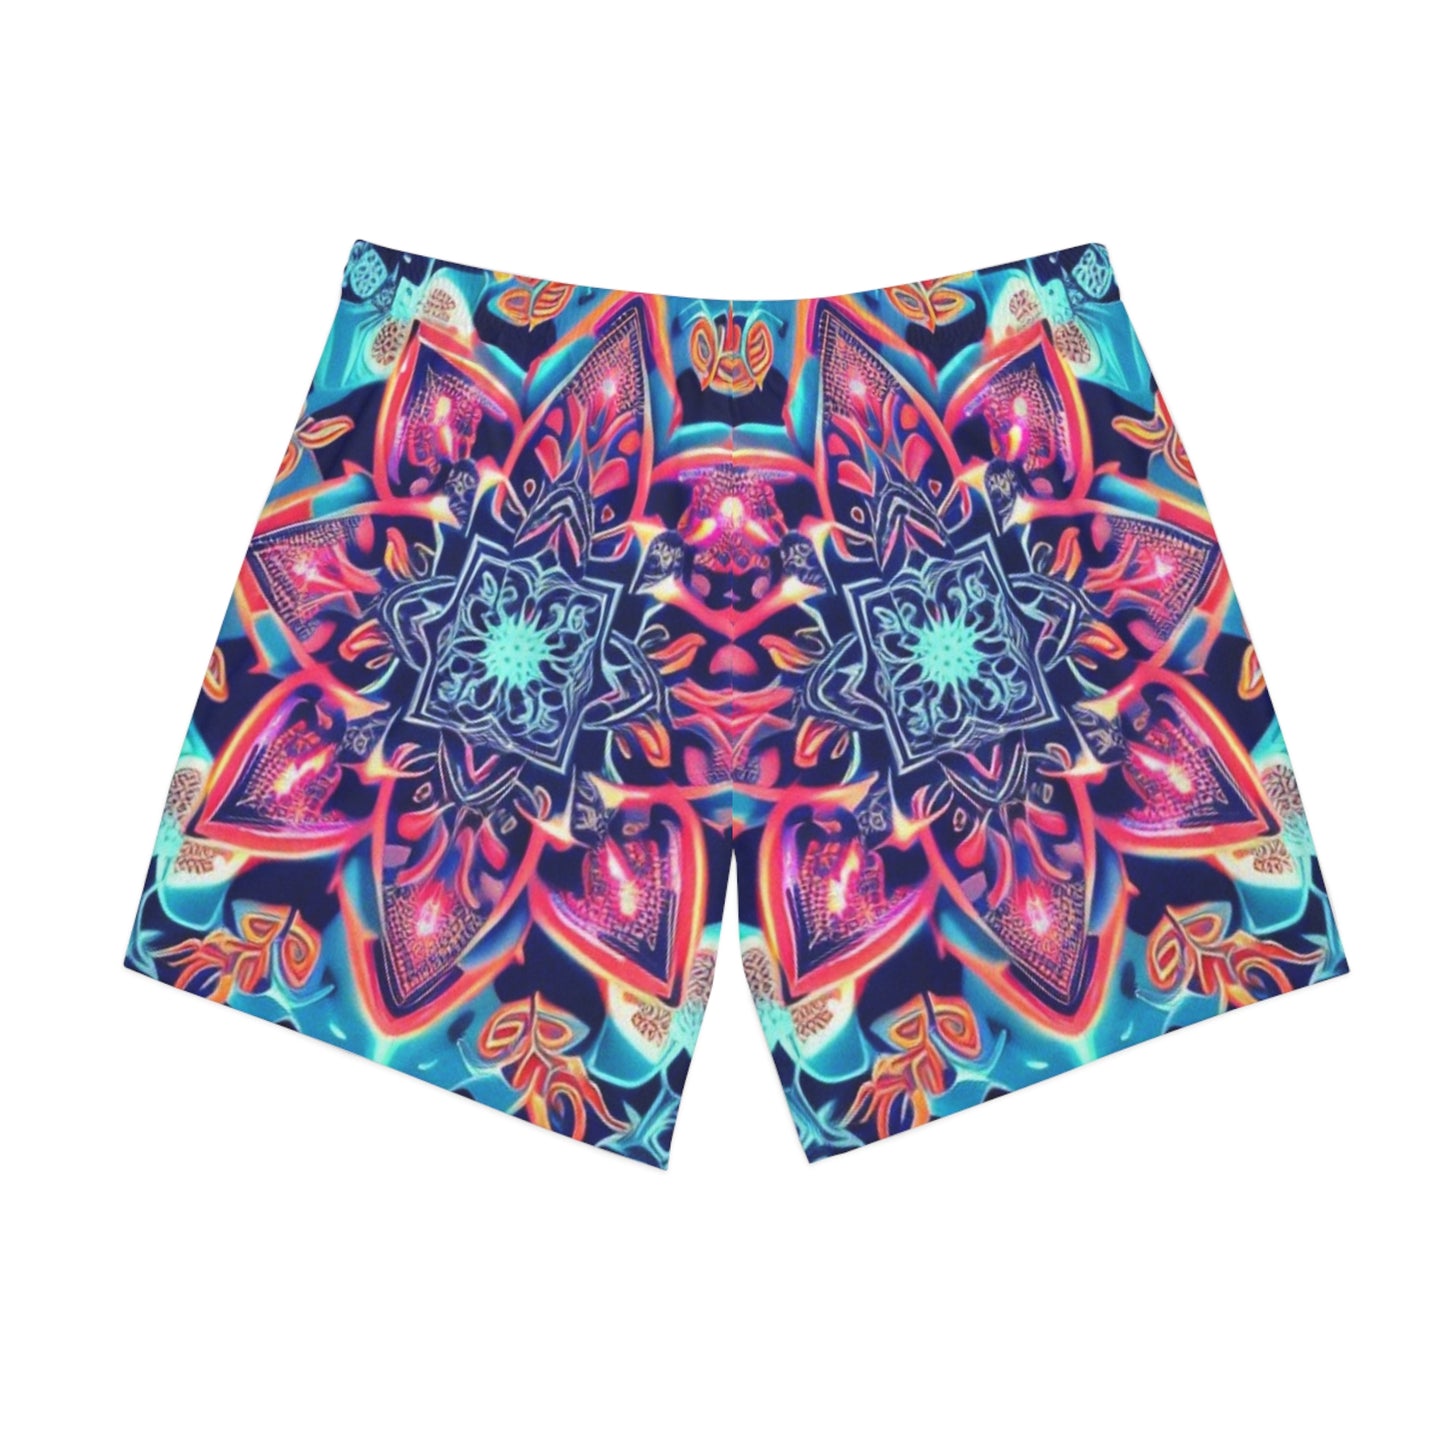 Atziluth Gallery " Abstract Print" Men's Elastic Beach Shorts